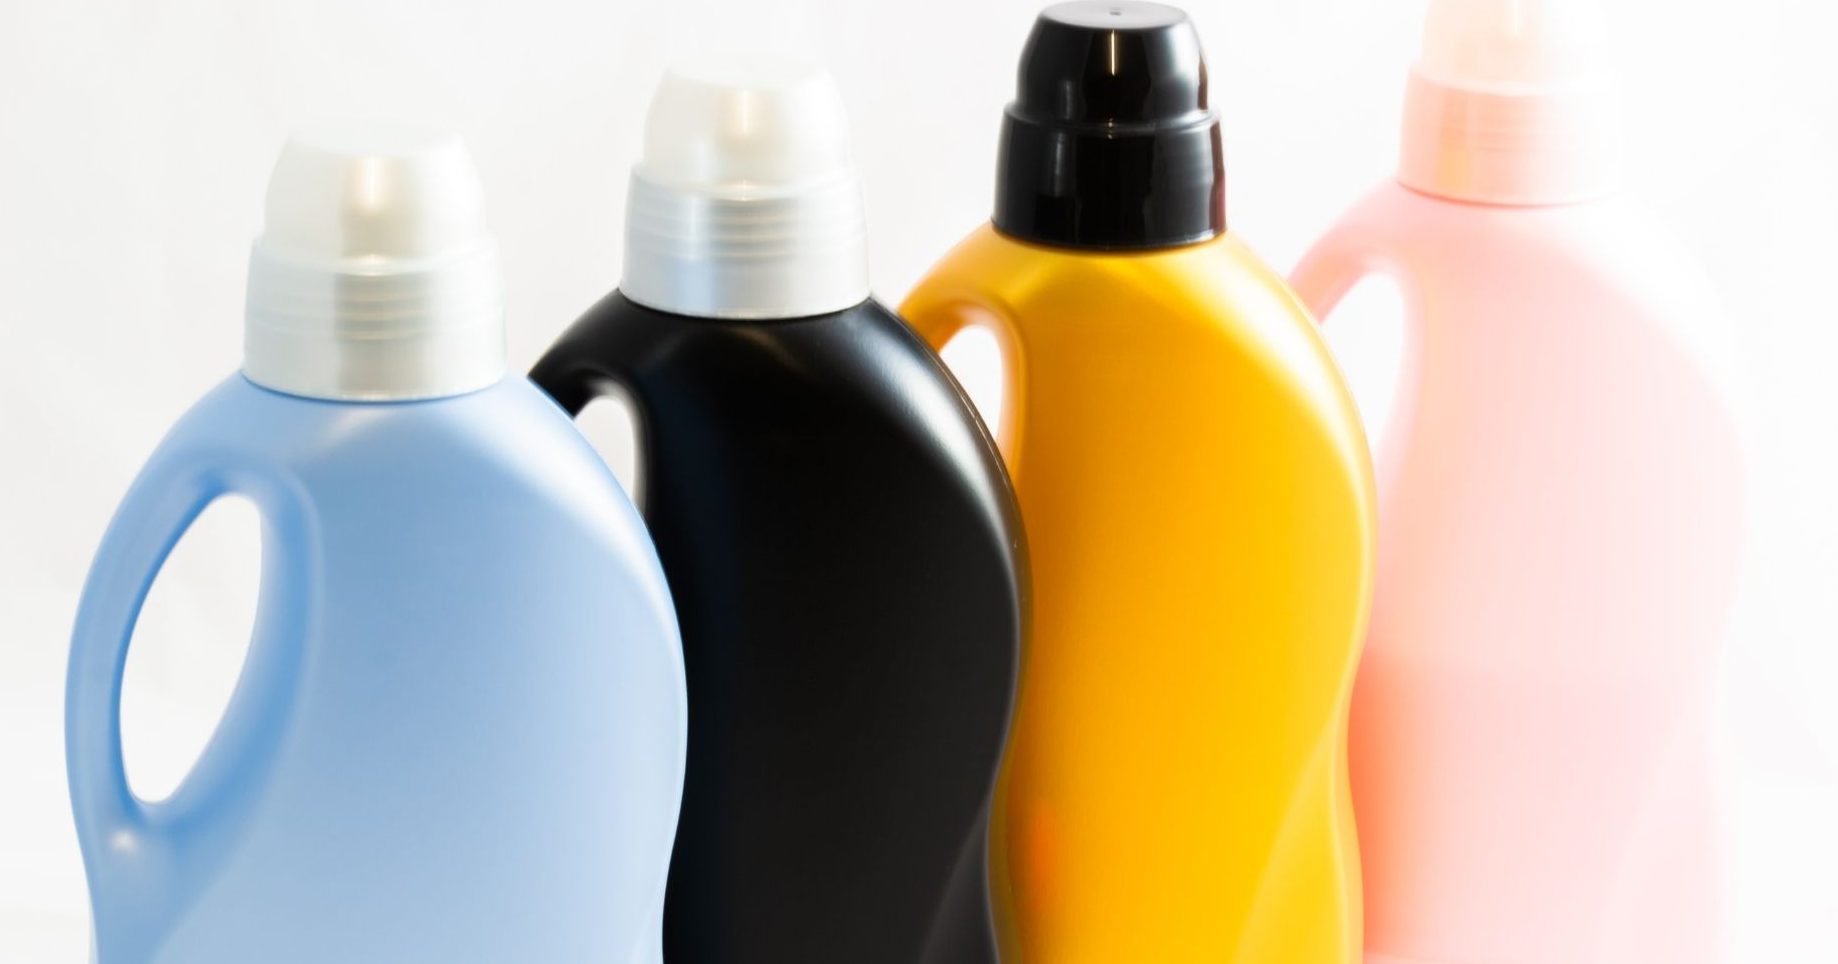 Global Blow-Molded Plastics Market Outlook, Opportunities And Strategies – Includes Blow-Molded Plastics Market Overview